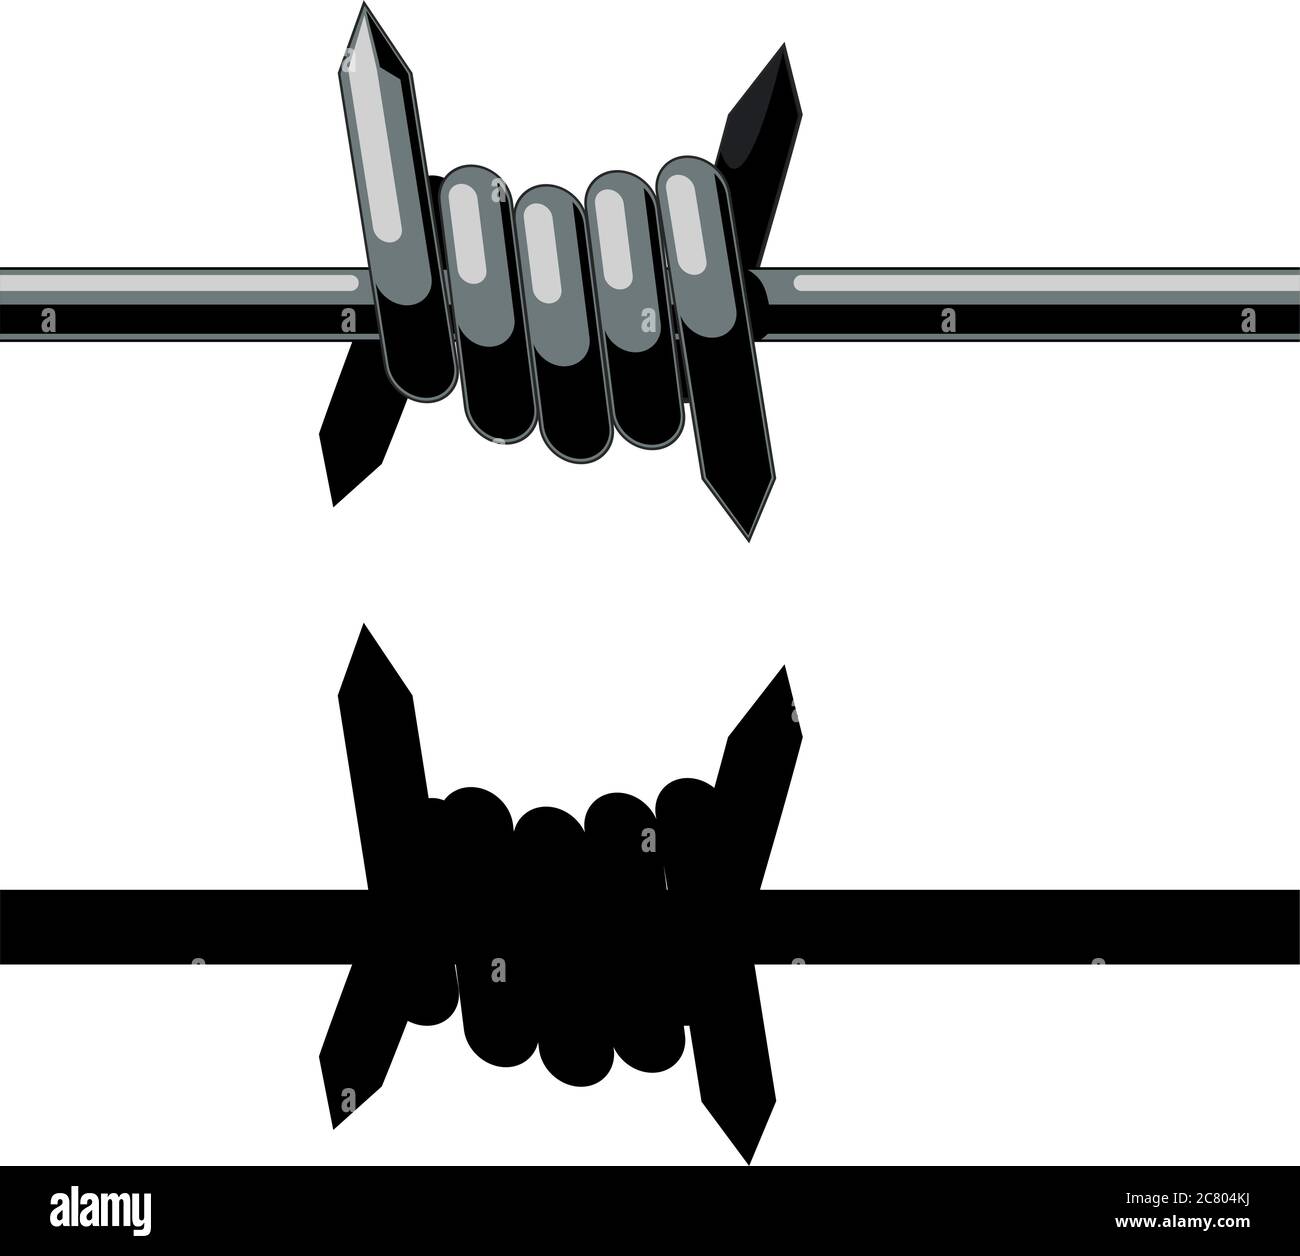 sharp barbed wire Stock Vector